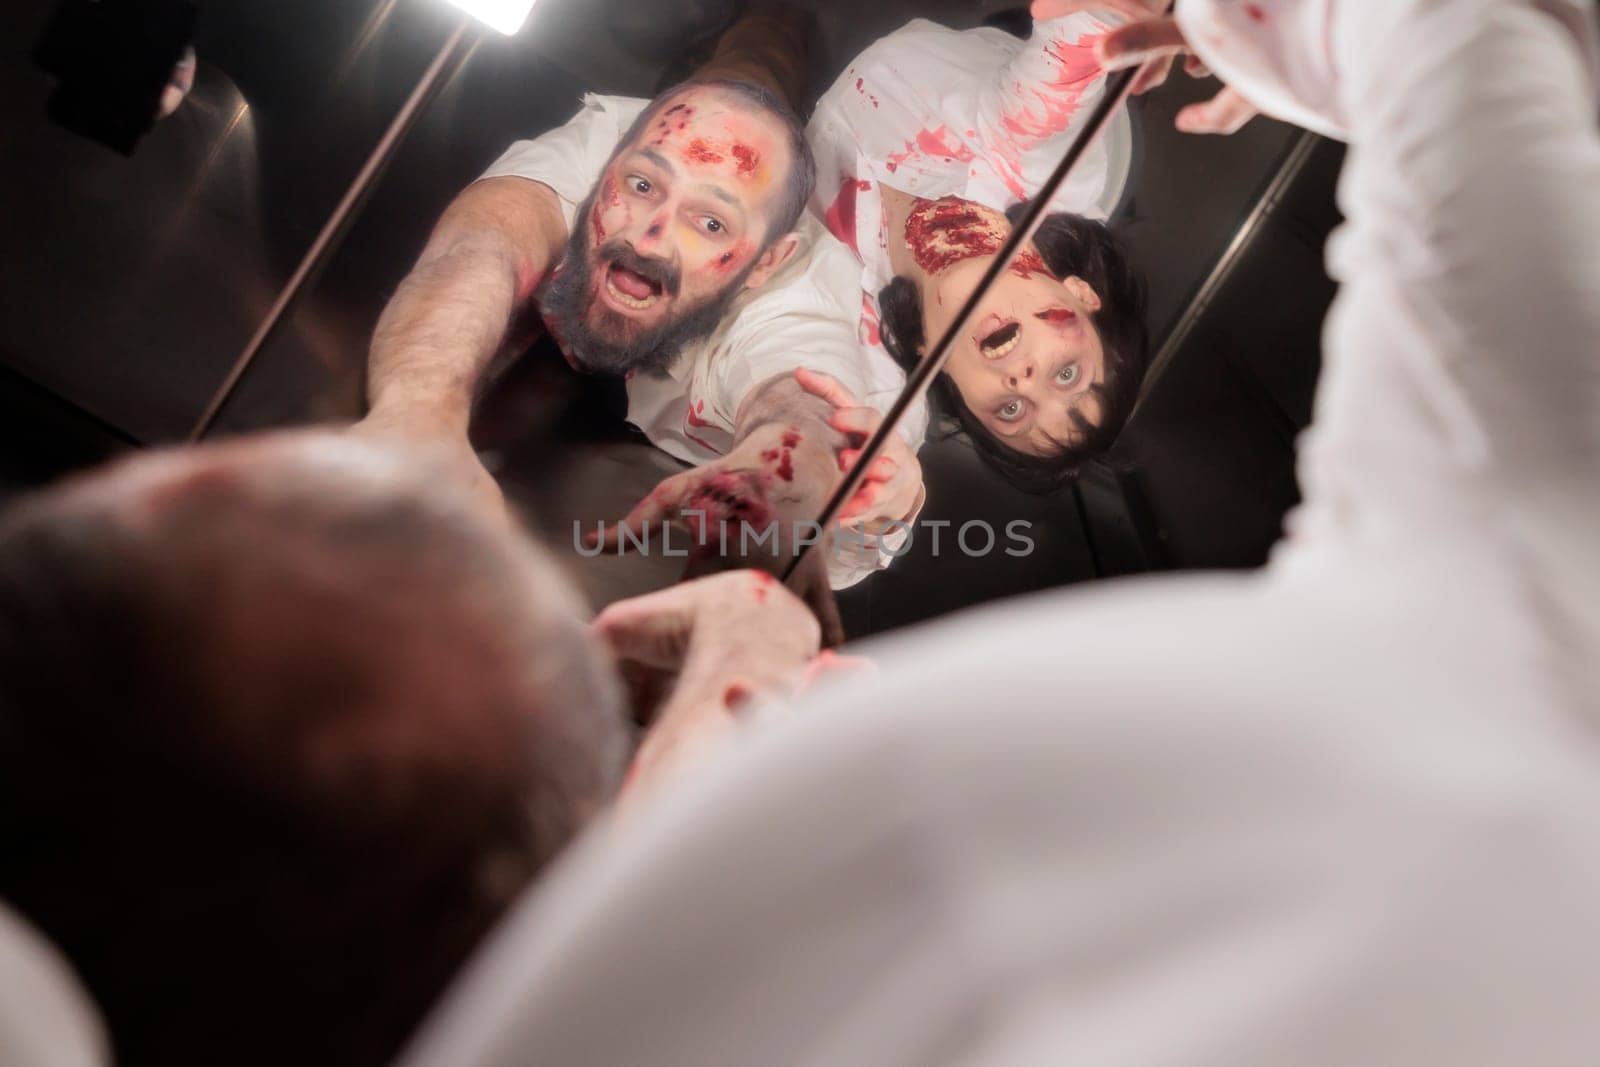 Zombies filled with blood and scars stuck in escalator during apocalypse by DCStudio